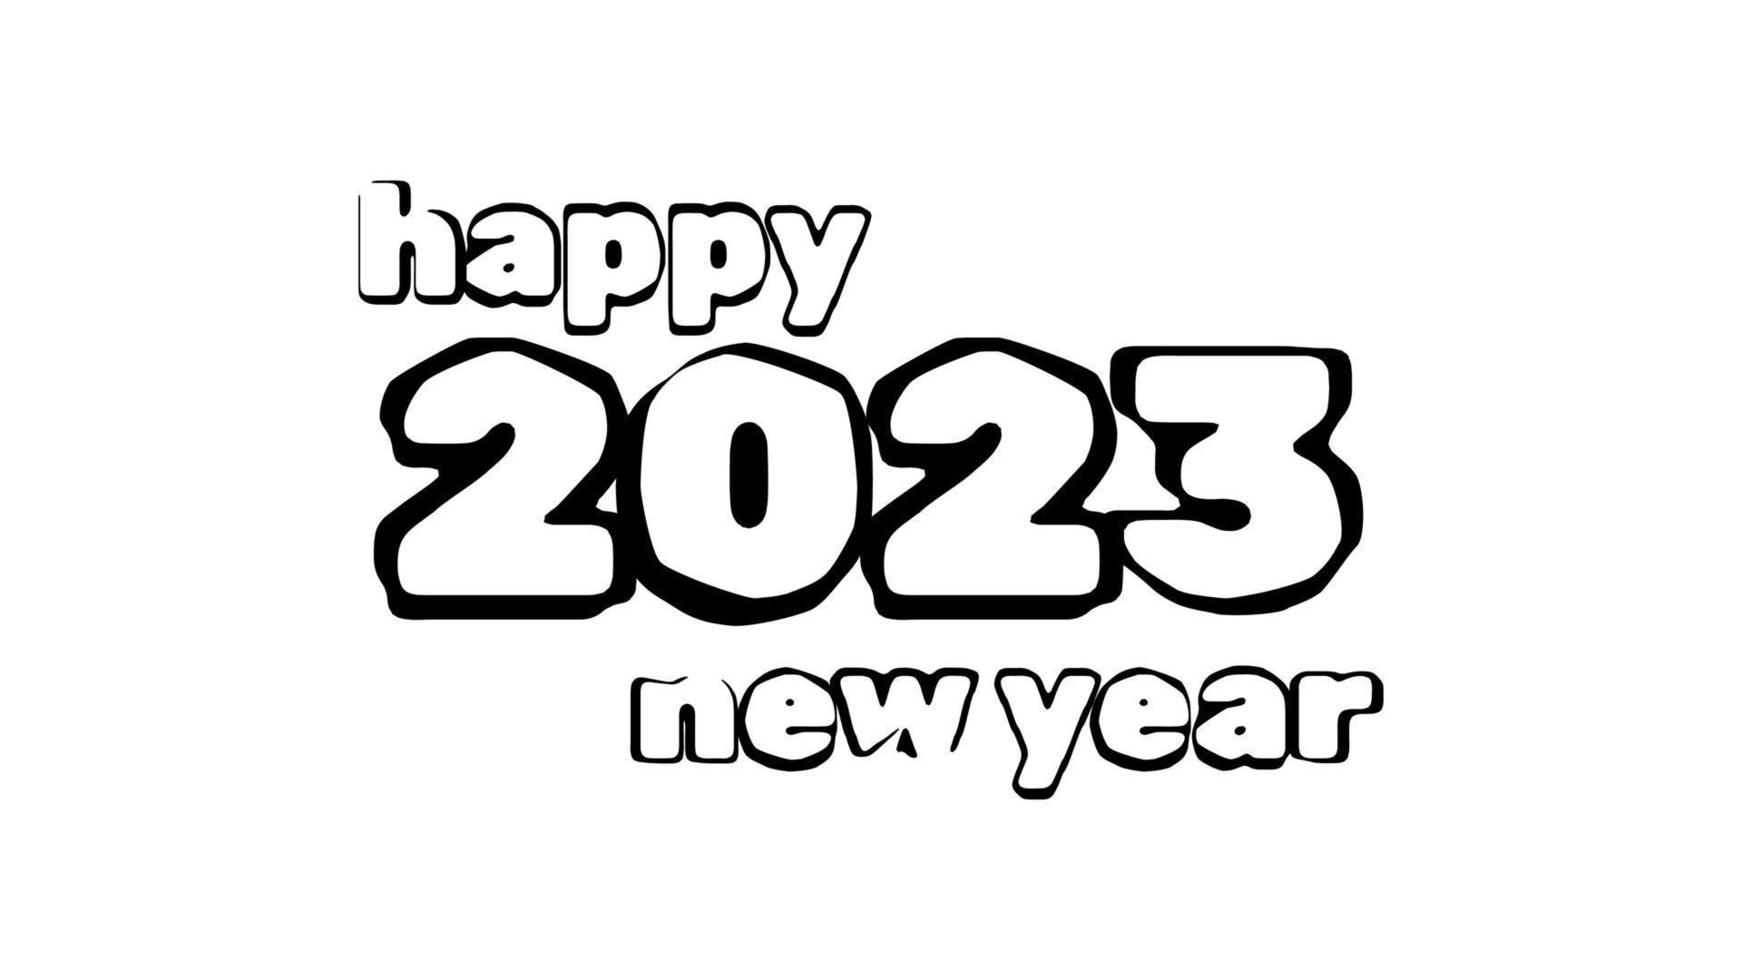 Happy New Year 2023 text typography white simple style vector